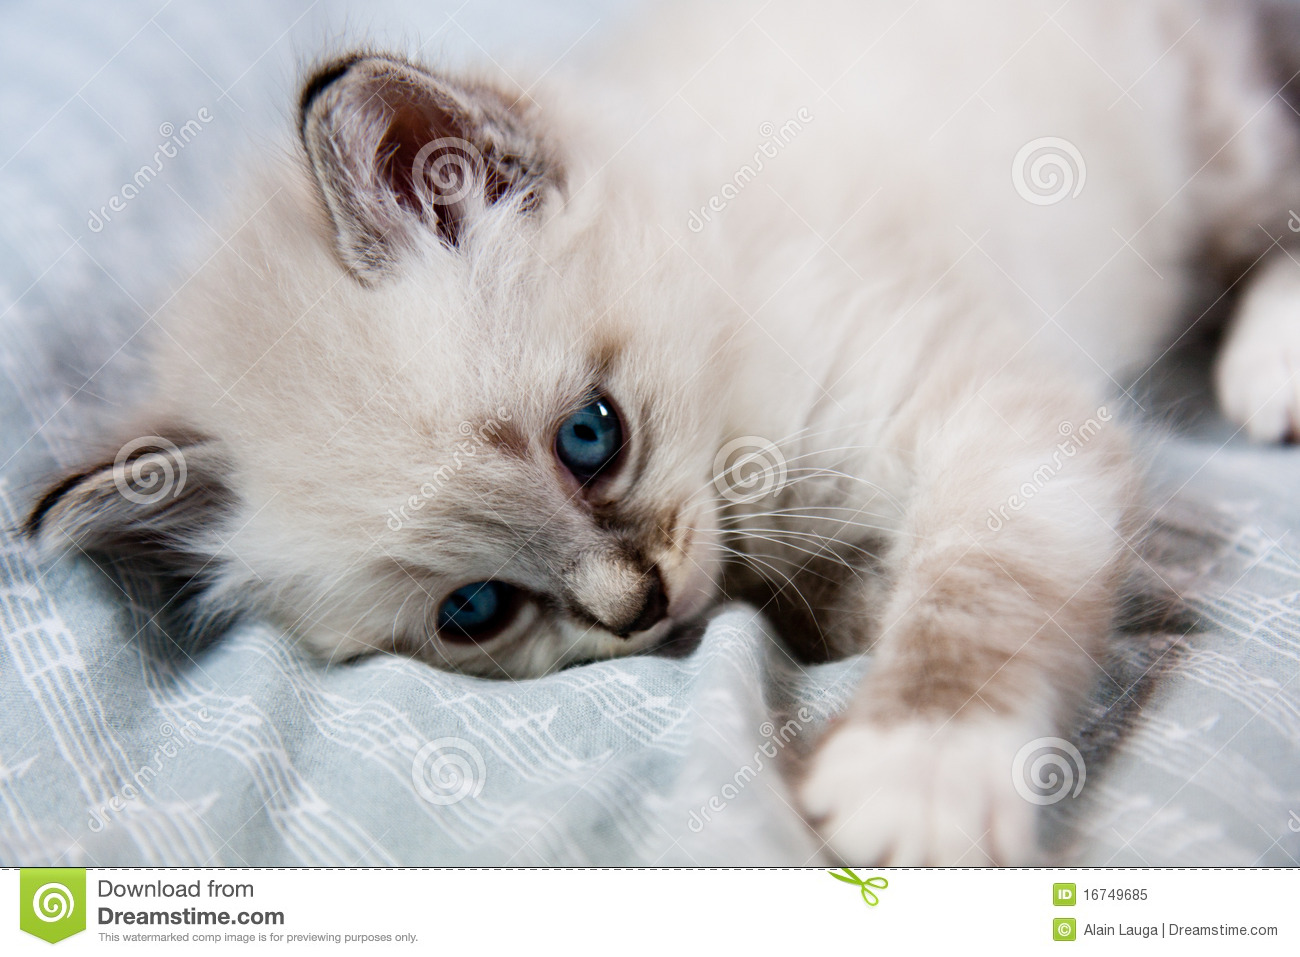 Young Kitten Clear Coat And Blue Eyes Lying On A Sheet